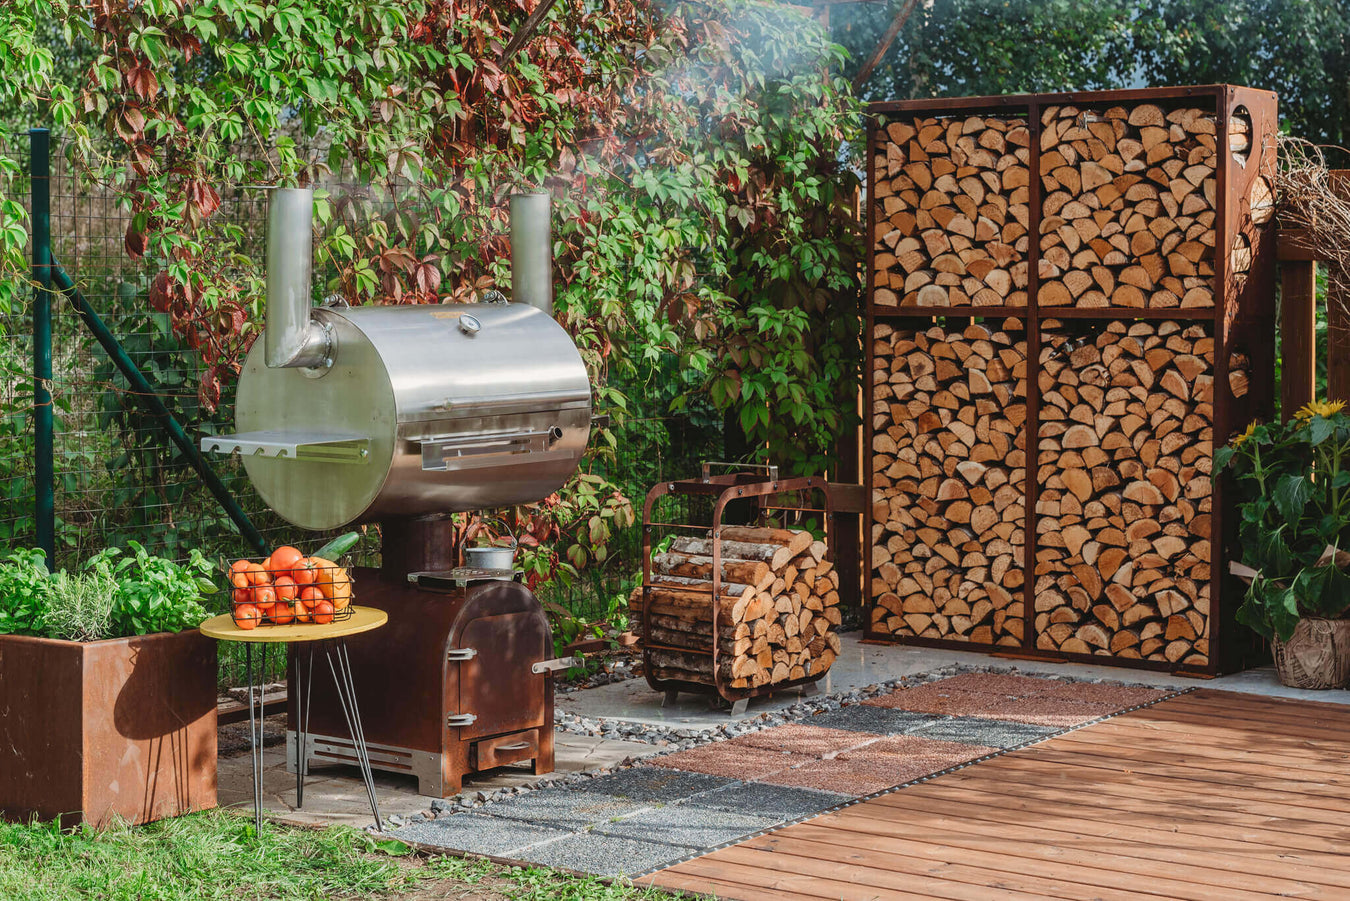 Outdoor wood store crafted from corten steel paired with a large metallic BBQ smoker by Grill Symbol, showcasing a stack of wood within the taller wood store structure. Set against a backdrop of lush greenery and wooden decking with interspersed grass, the image captures the functional and aesthetic synergy between the corten steel wood store and the distinctive BBQ smoker, creating a harmonious outdoor setting